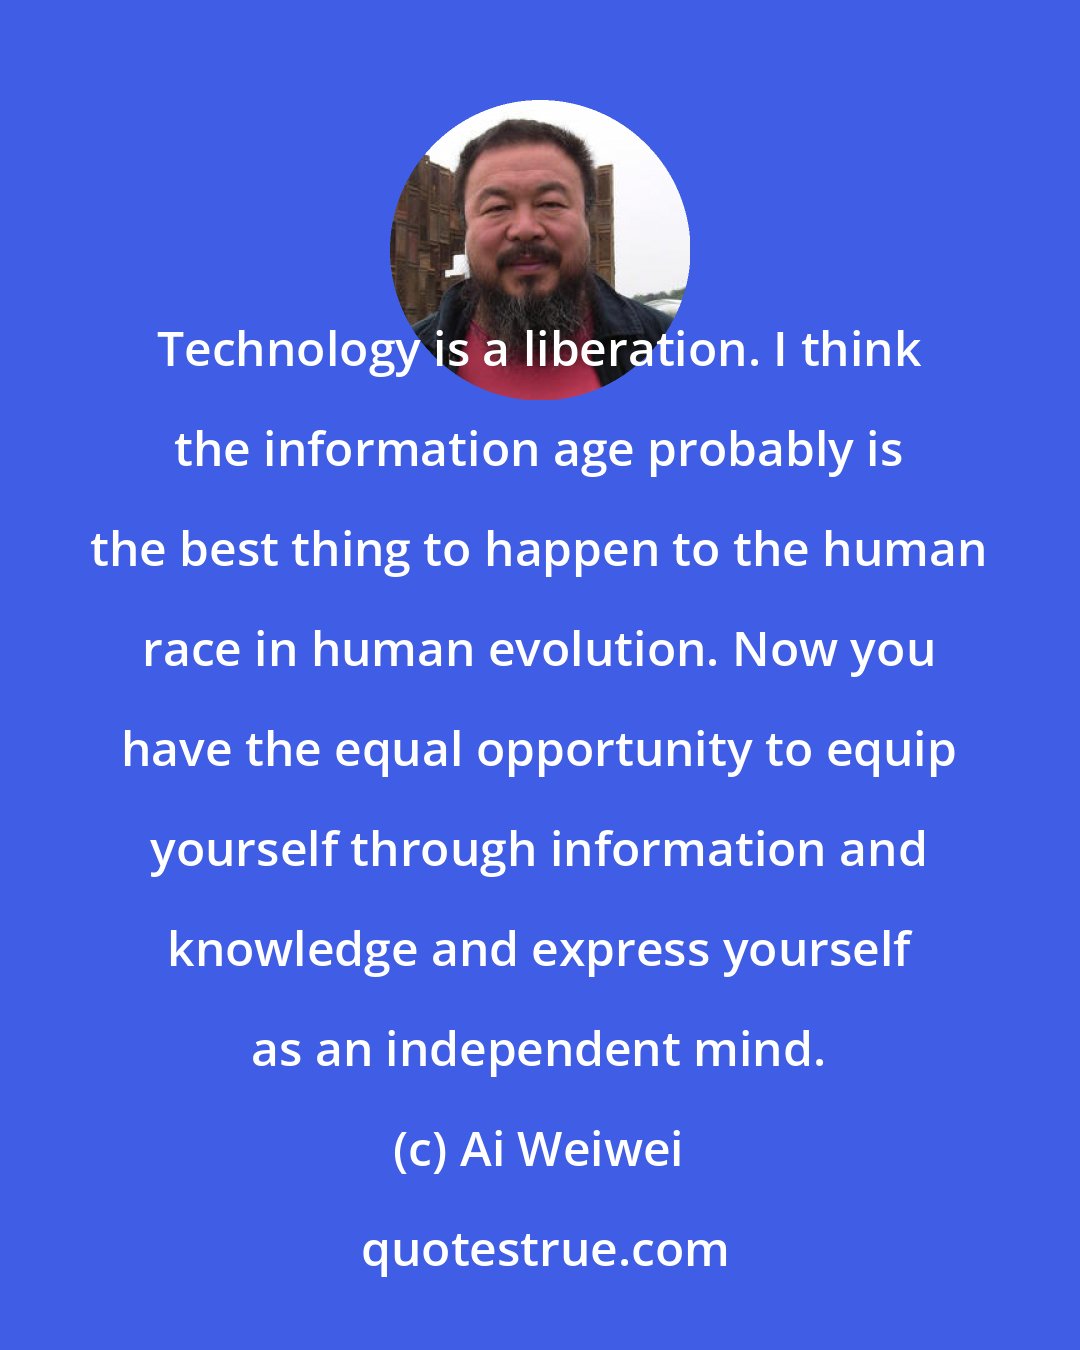 Ai Weiwei: Technology is a liberation. I think the information age probably is the best thing to happen to the human race in human evolution. Now you have the equal opportunity to equip yourself through information and knowledge and express yourself as an independent mind.